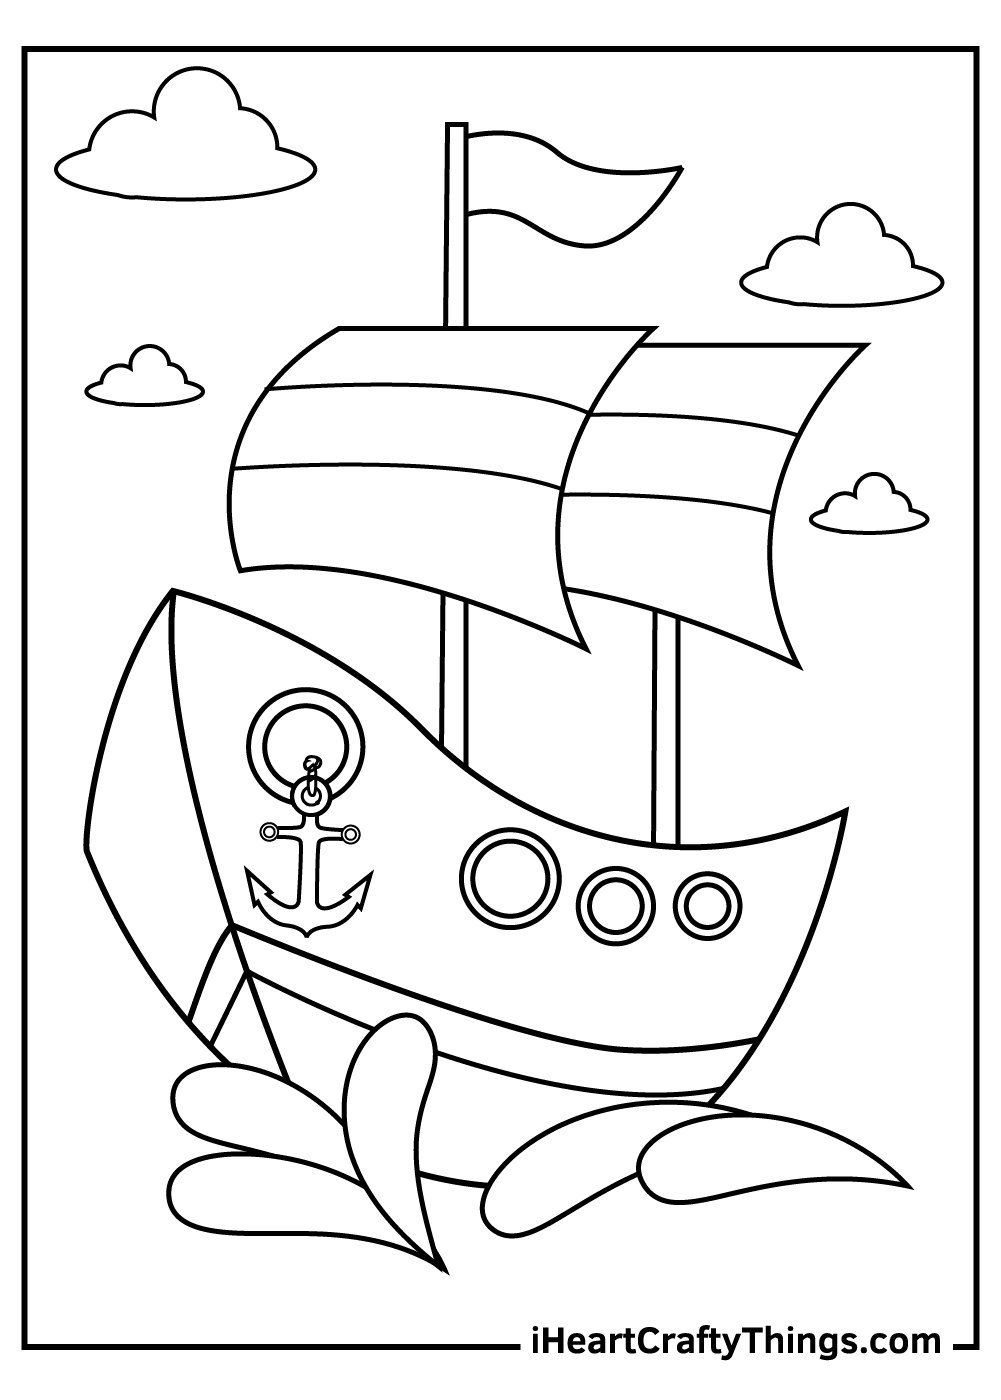 Ships And Boats Coloring Pages Updated 20